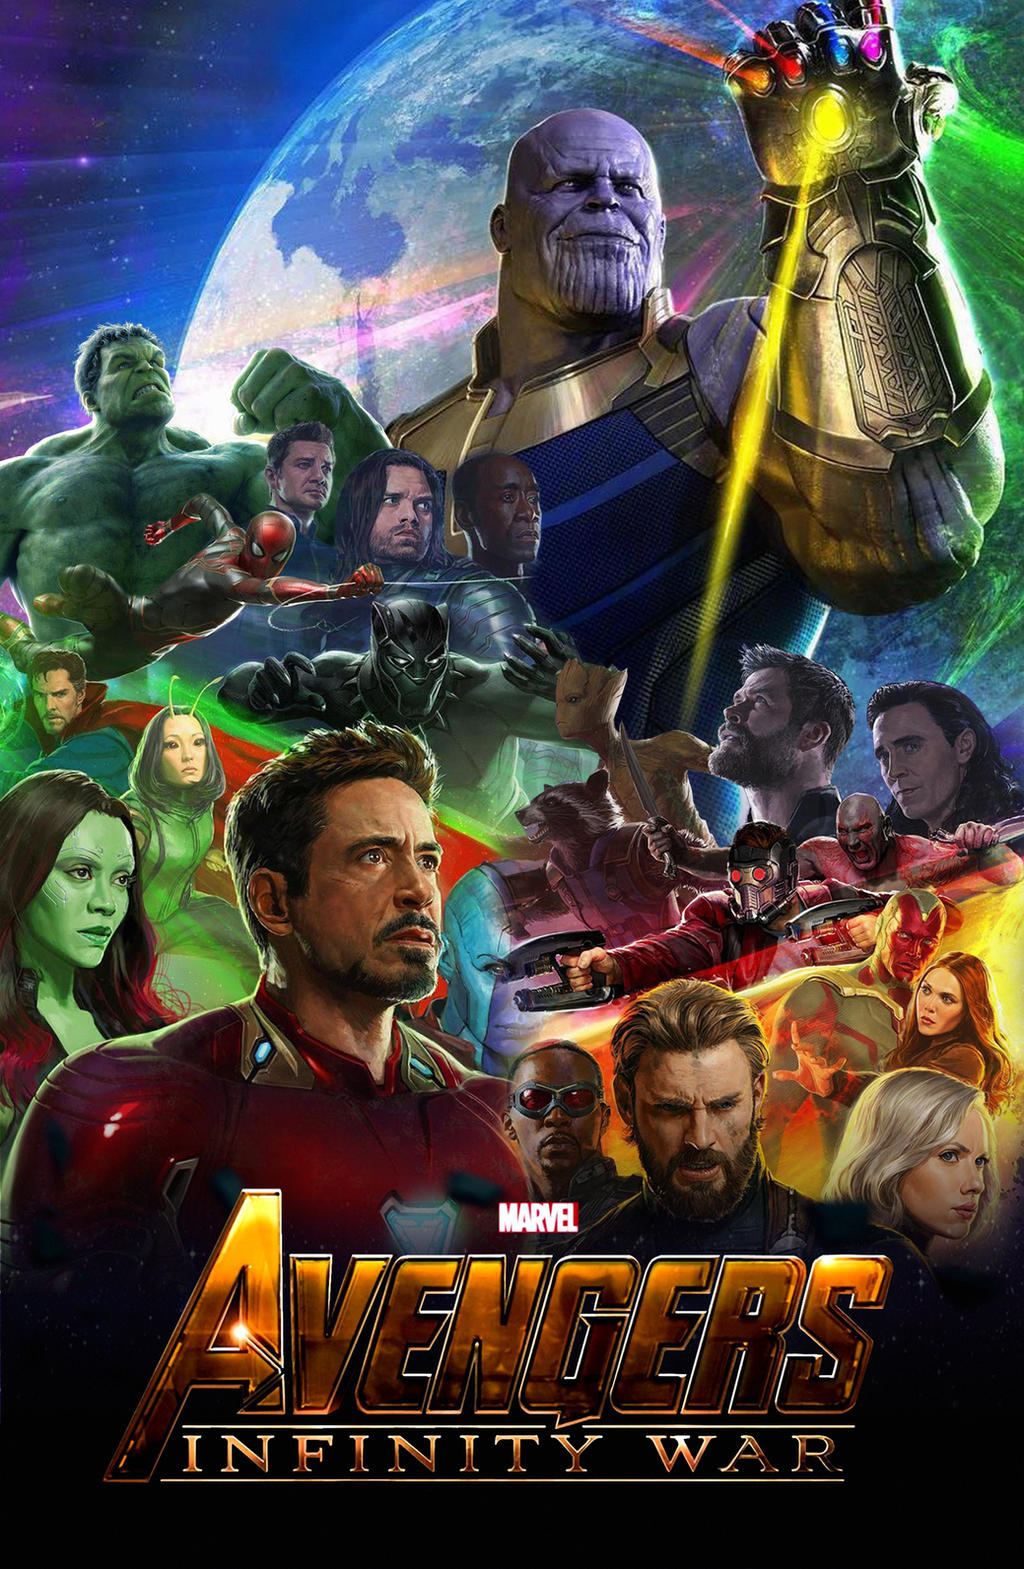 The Avengers Infinity War 2018 Poster by edaba7 on DeviantArt